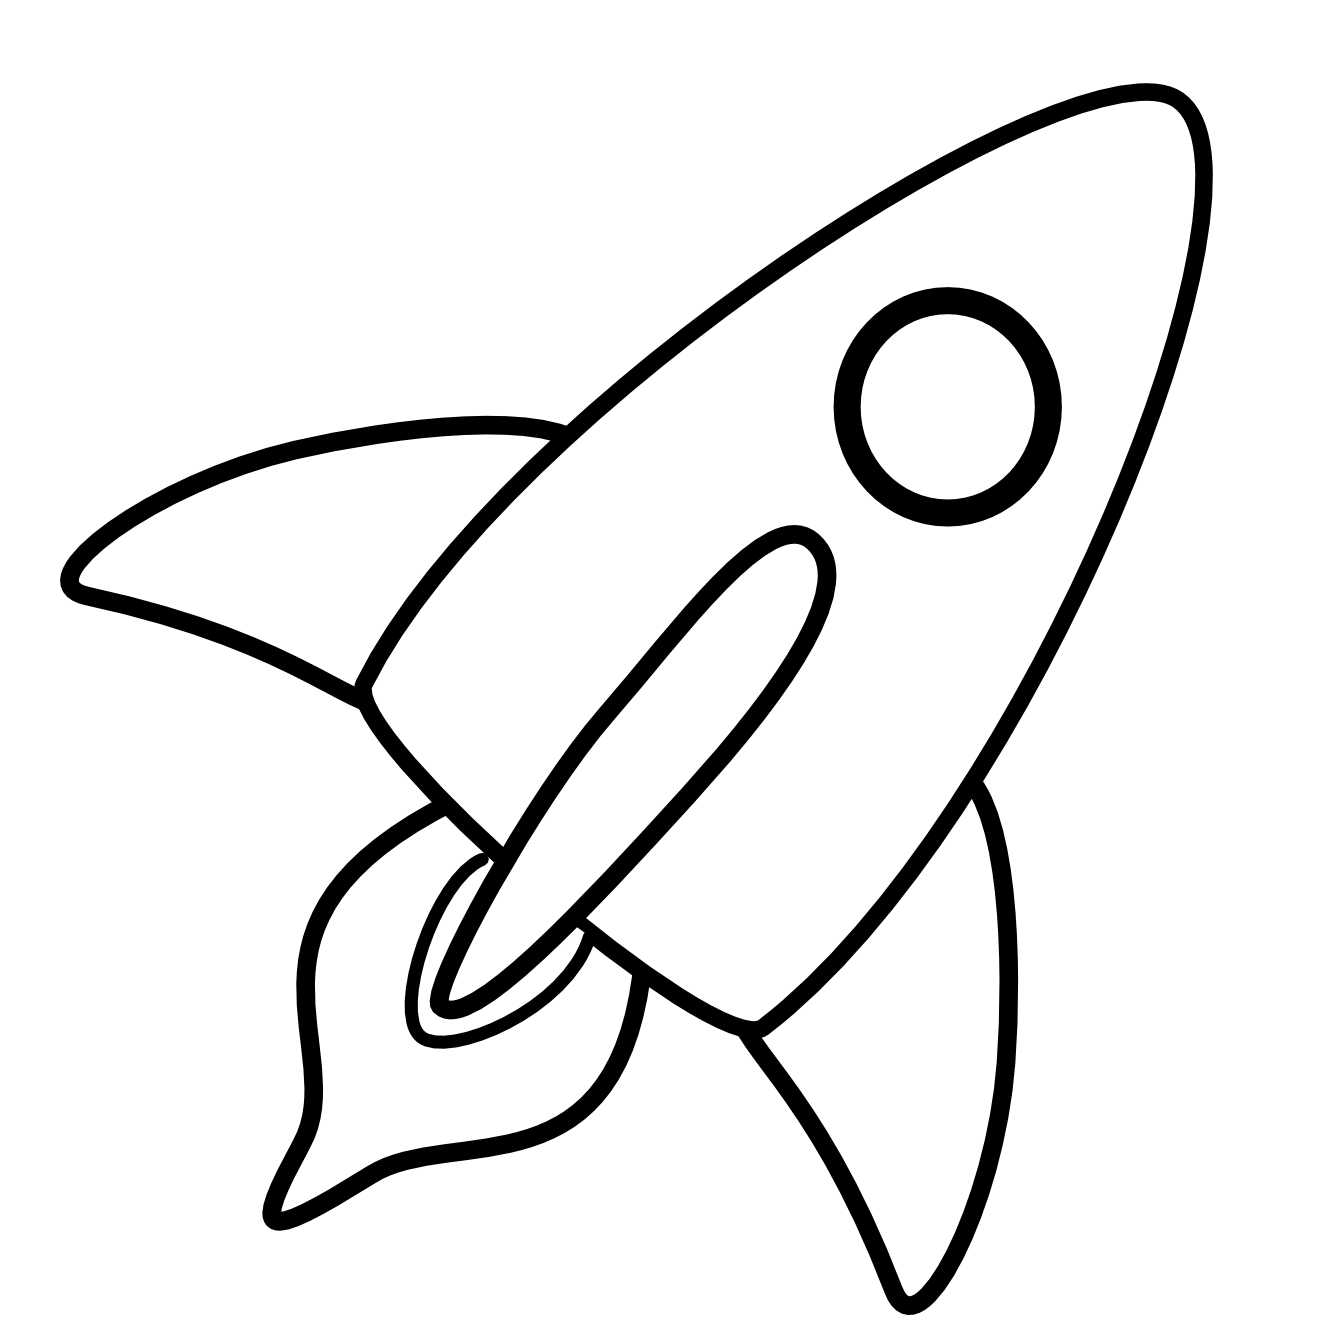 Clipart rocket fast. Elbow black and white